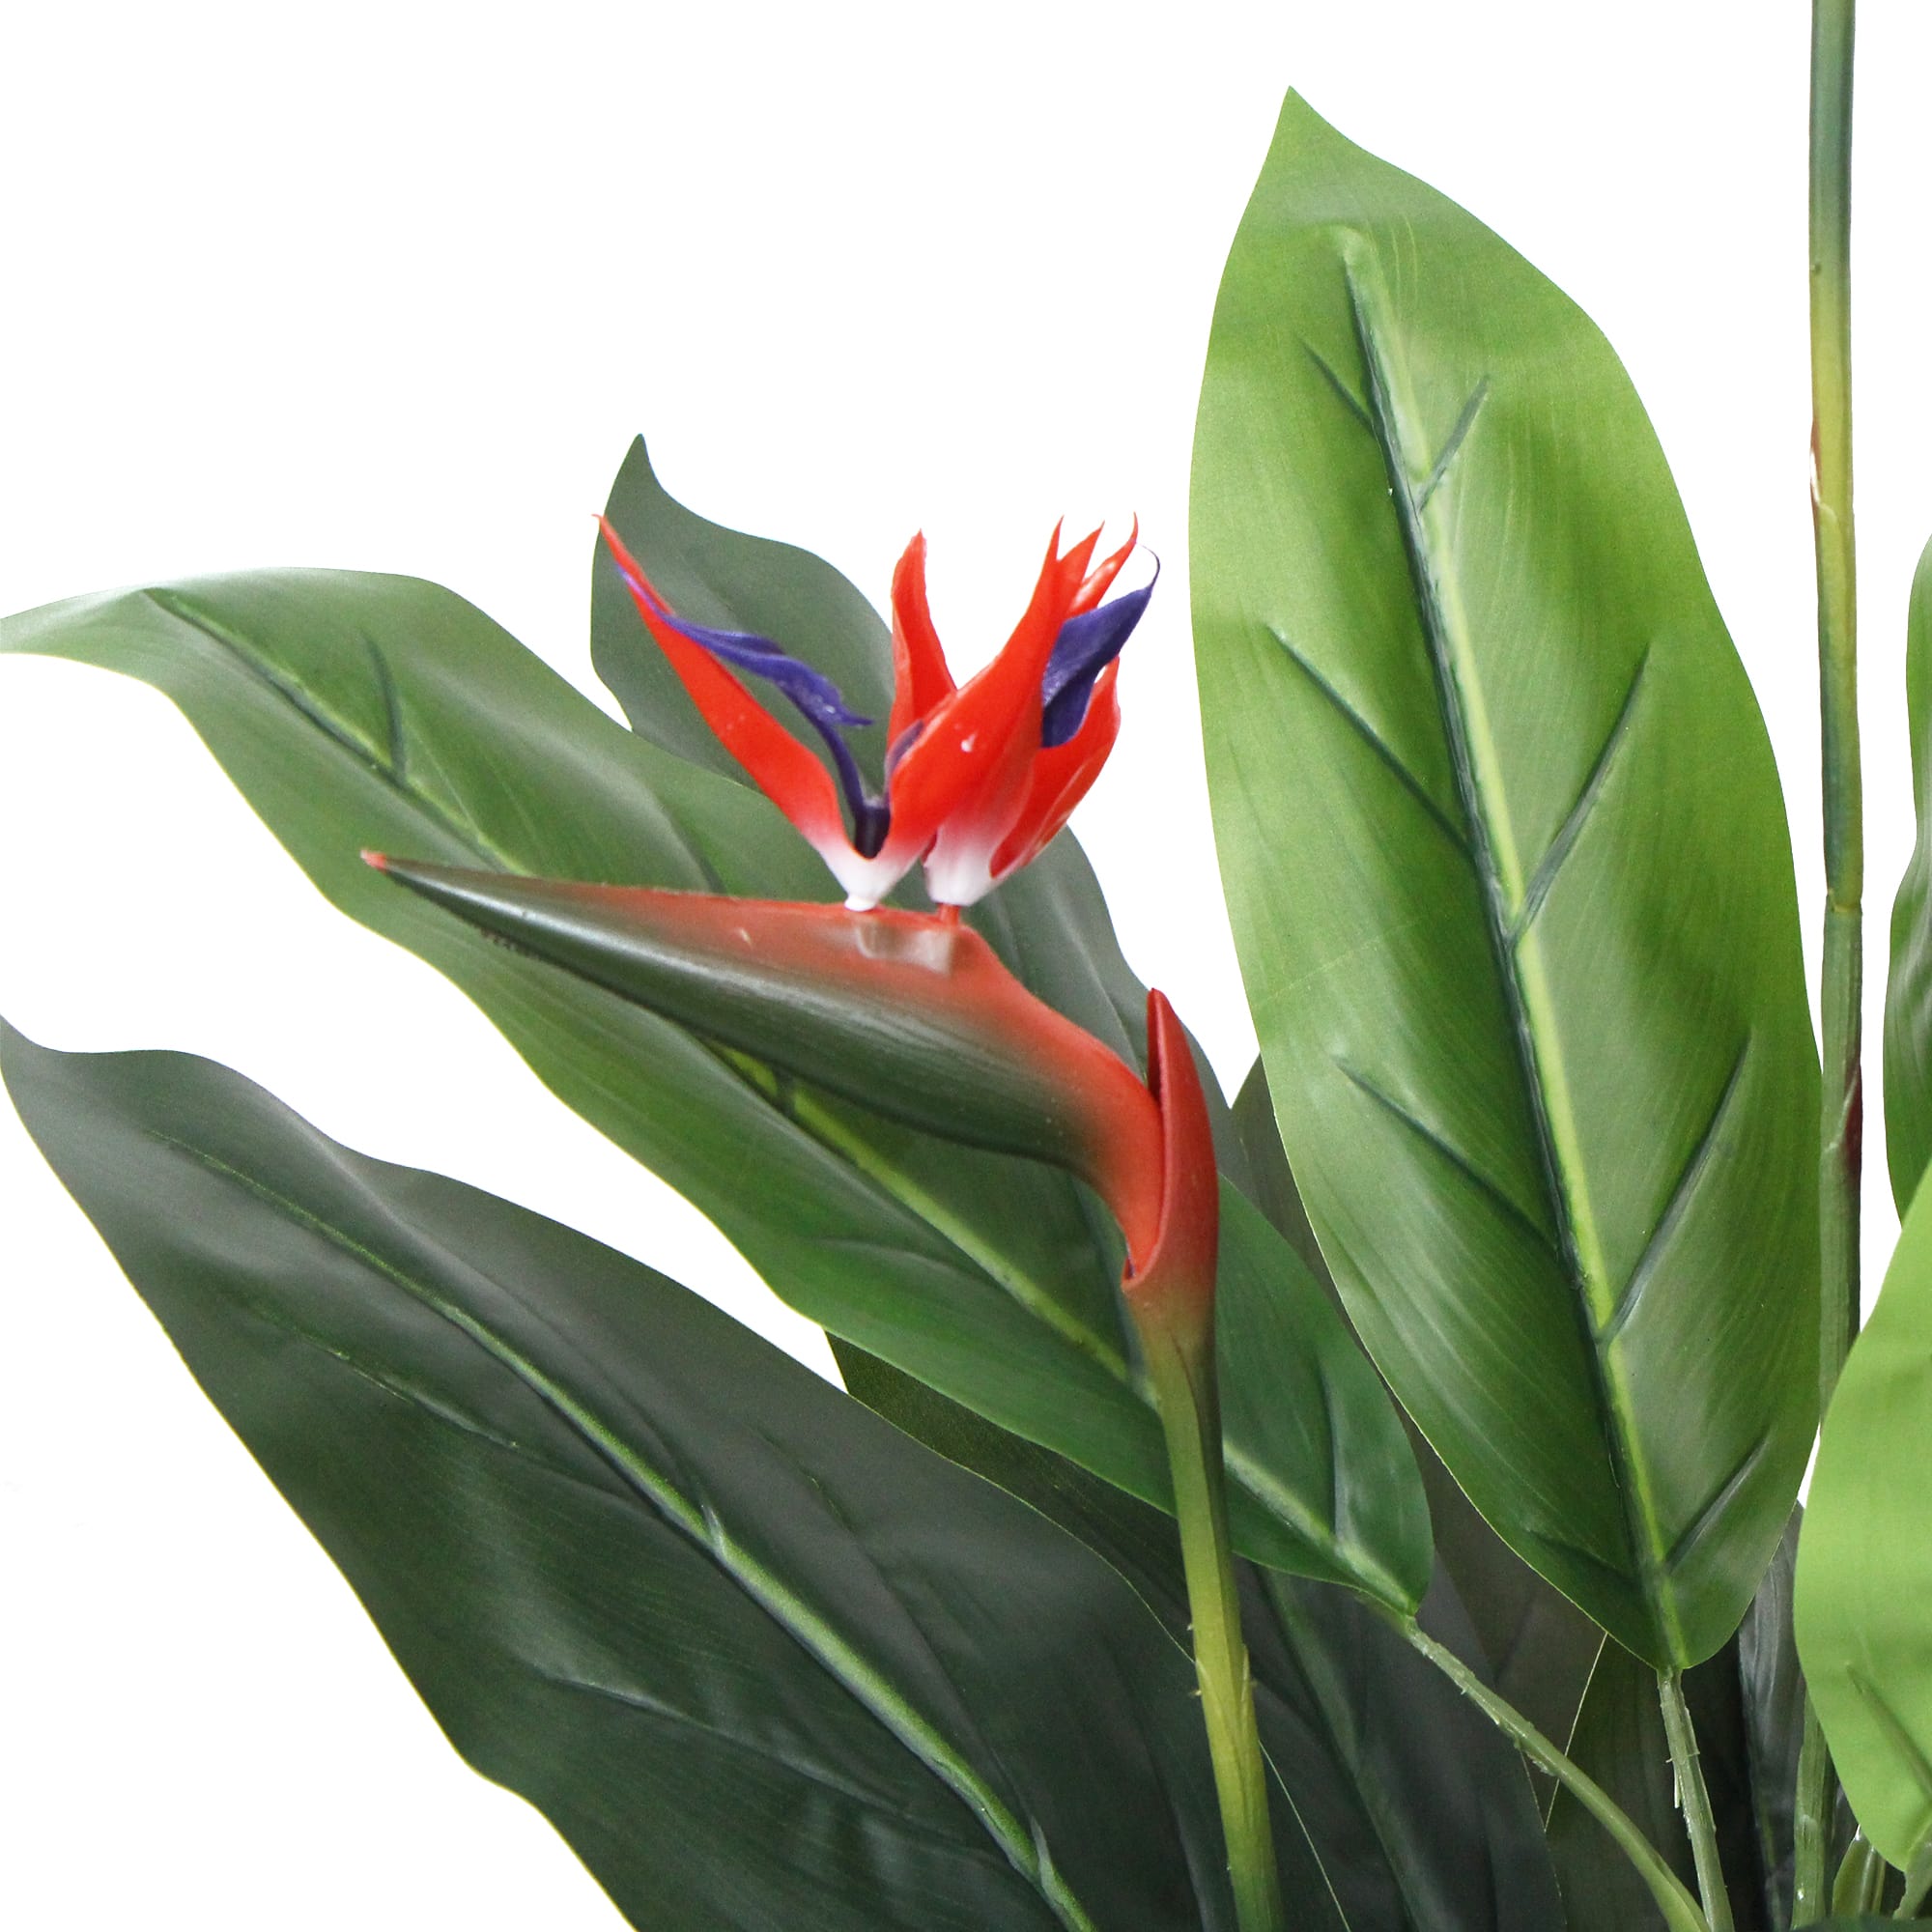 Modern Artificial Potted 150cm Bird Of Paradise Plant - Designer Vertical Gardens artificial green walls with flowers Artificial Trees